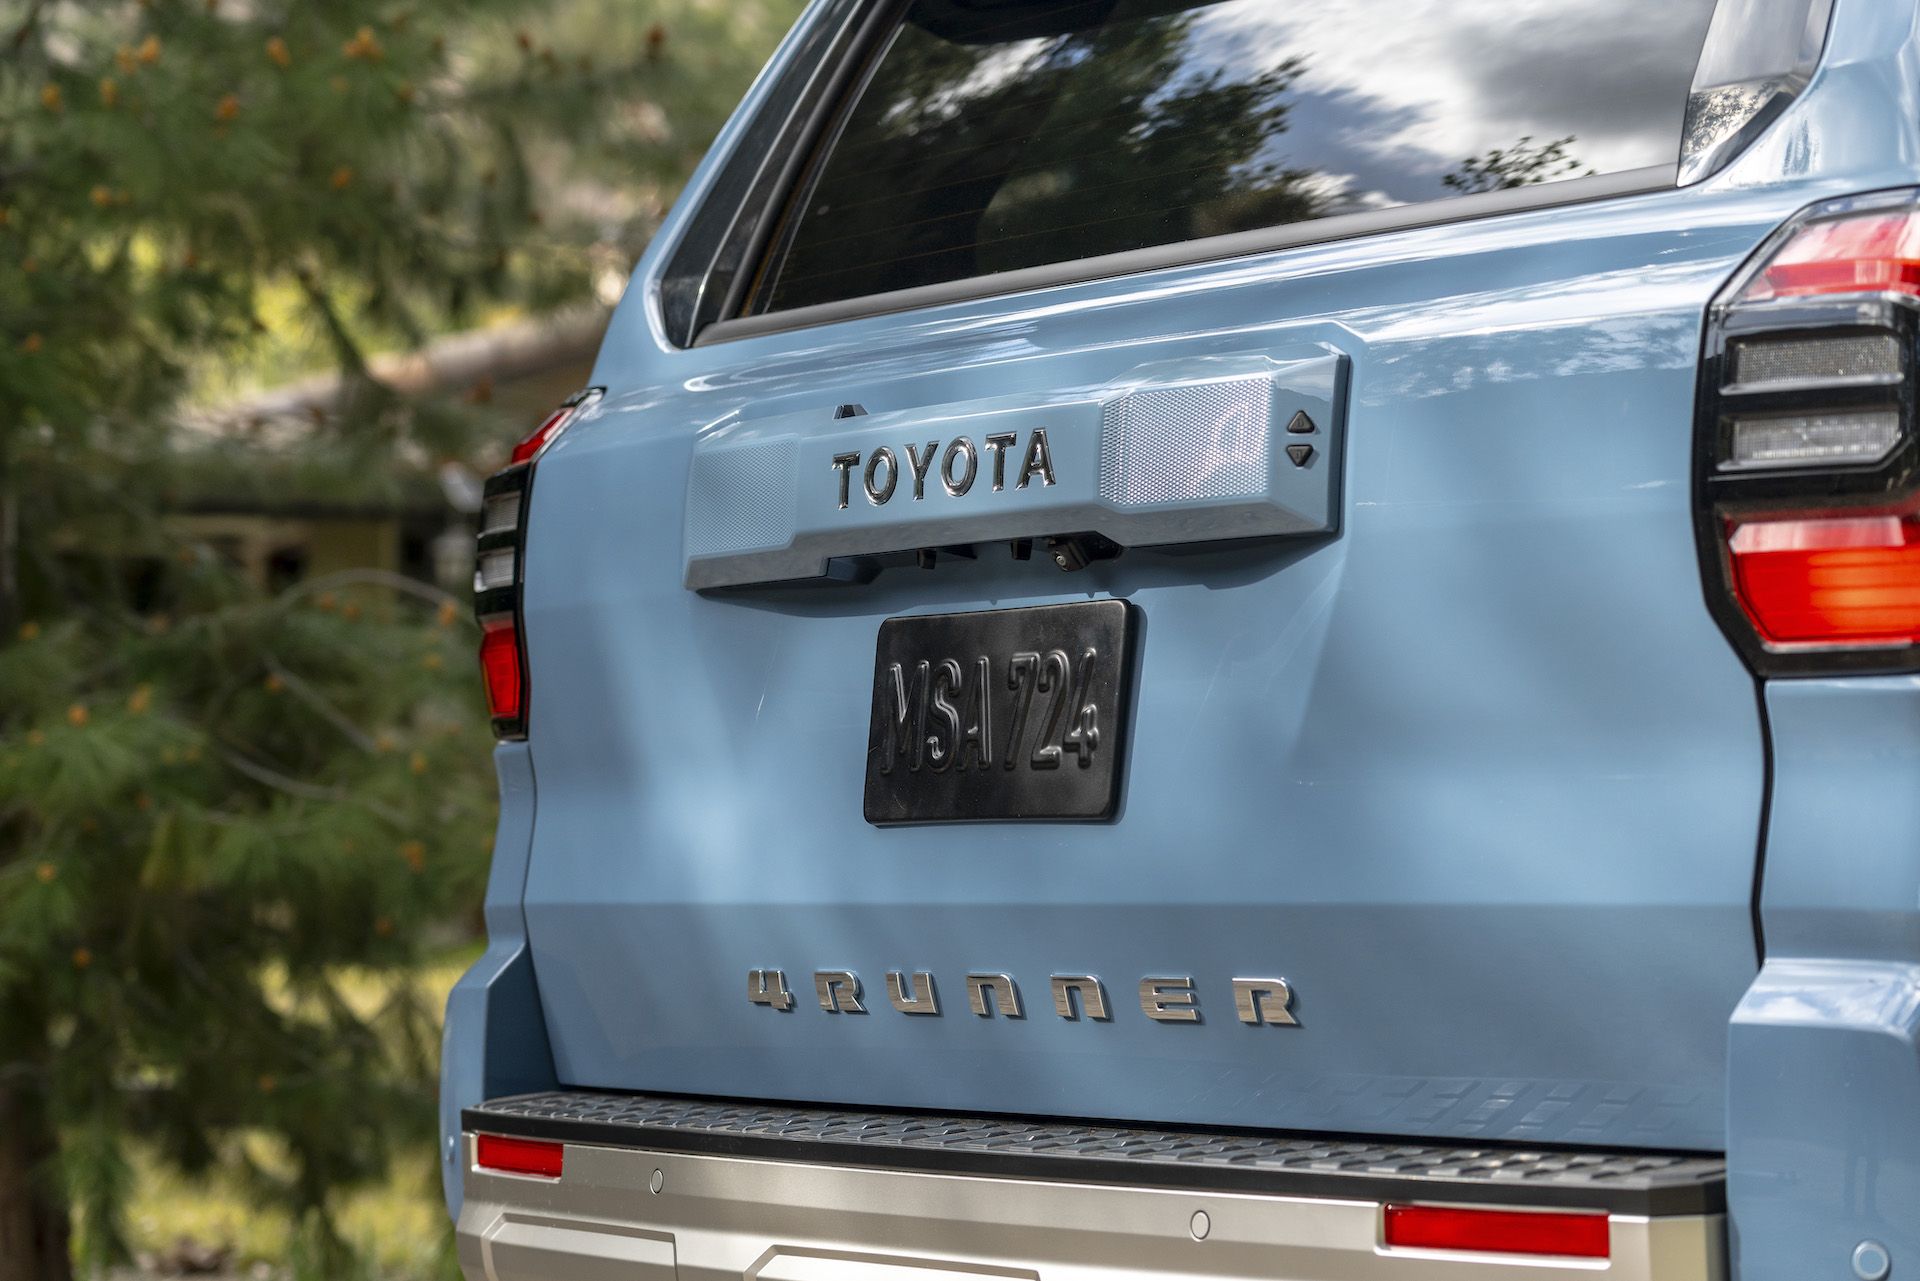 2025 Toyota 4runner Photos: 2025 4Runner LIMITED (Interior, Cargo Space, Exterior) in Heritage Blue color 2025-toyota-4runner-limited-110-jpg-66156208babea